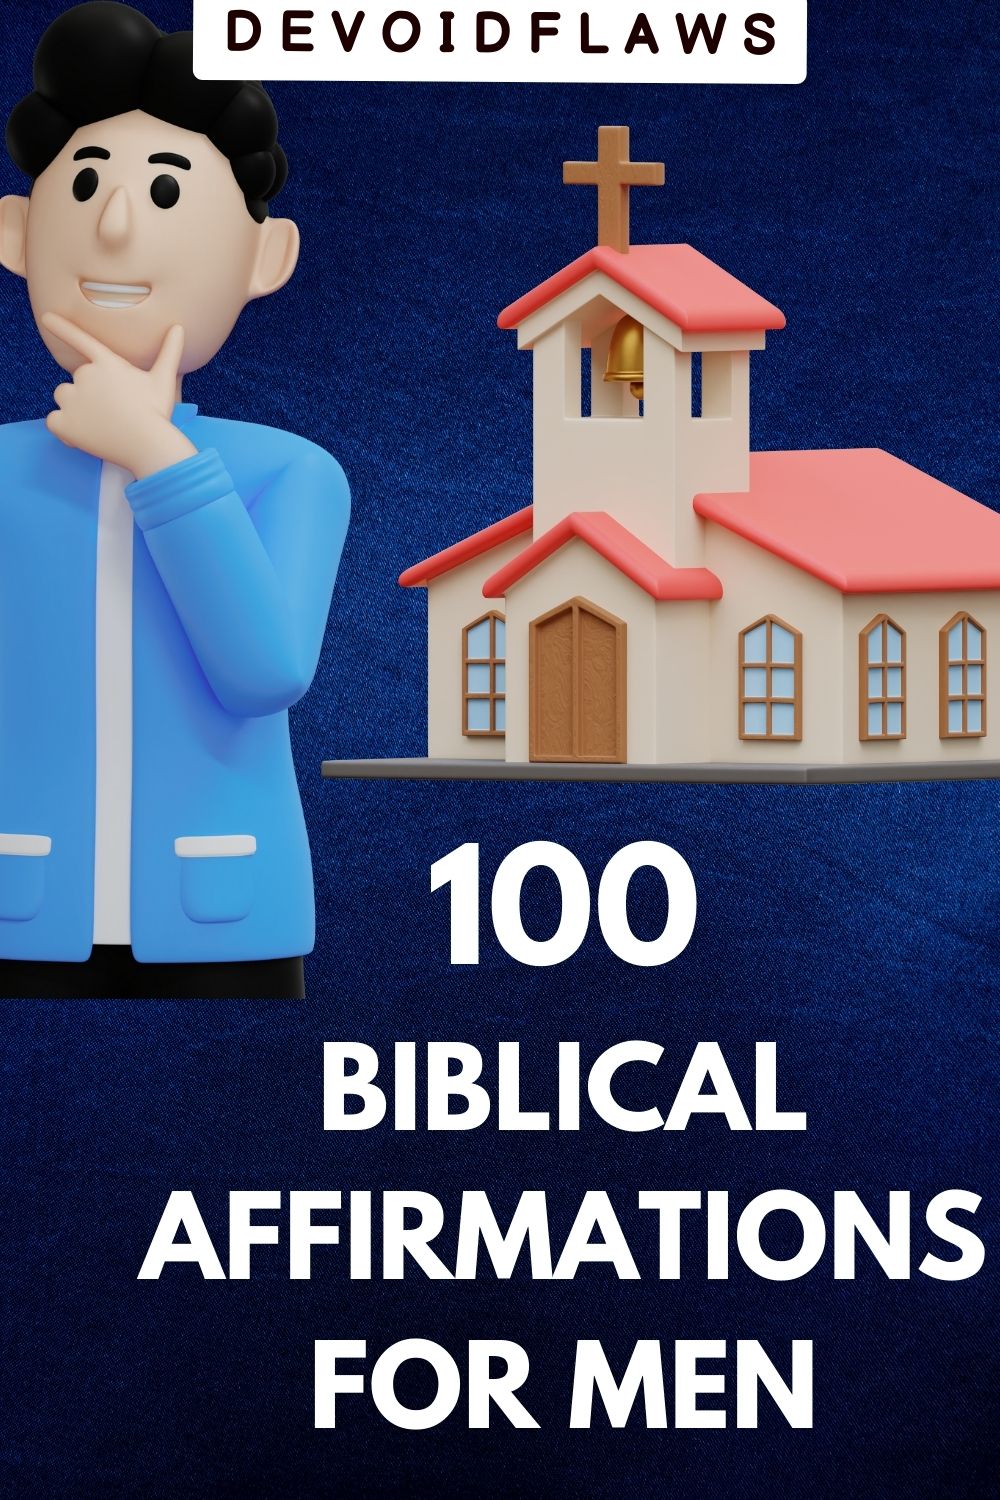 image with text - 100 biblical affirmations for men